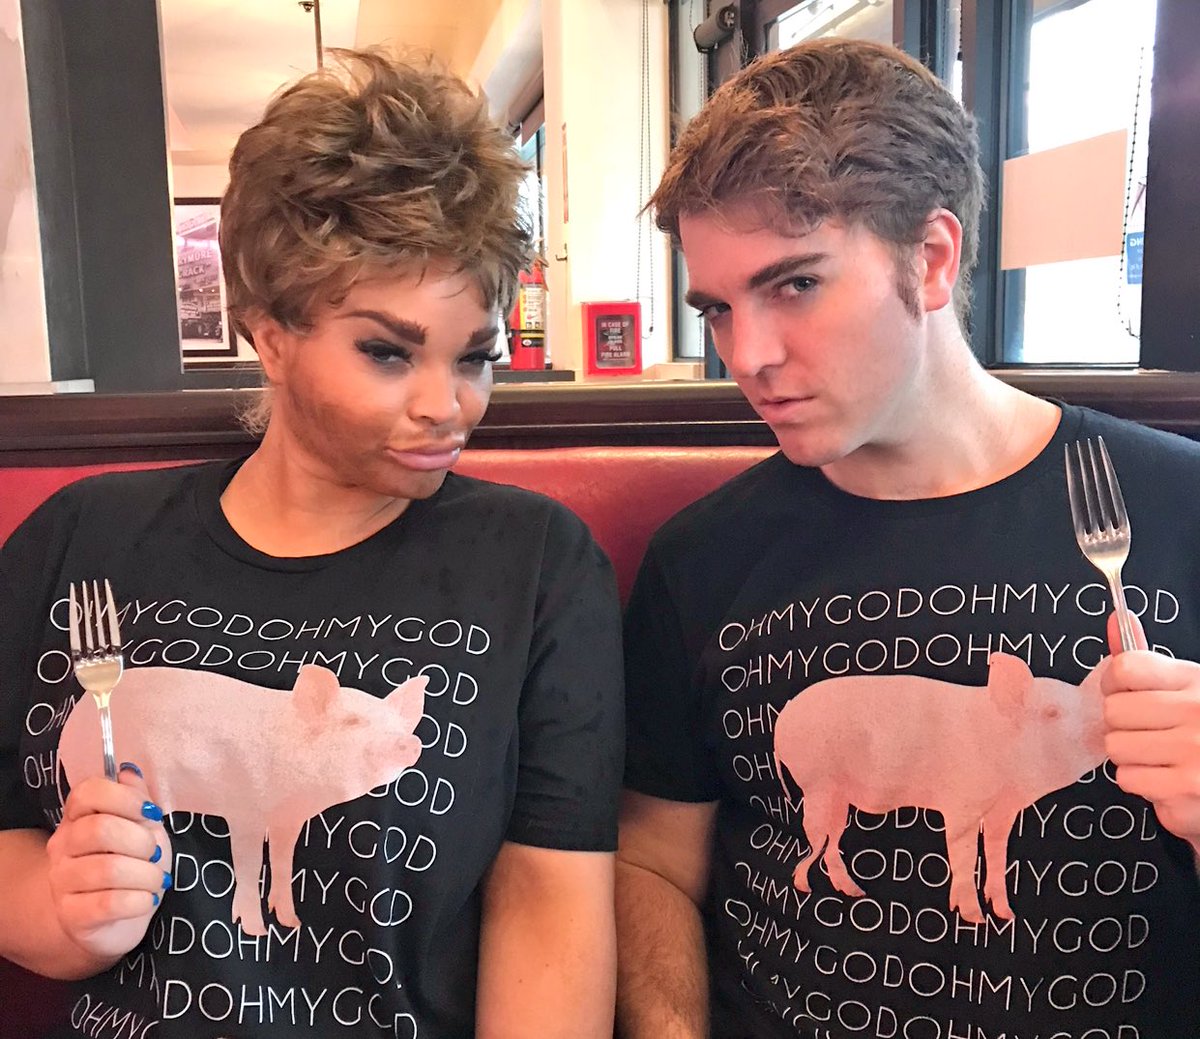 Match with us! Get ur own 🐷 shirt at amazon.com/shane ❤️🐷